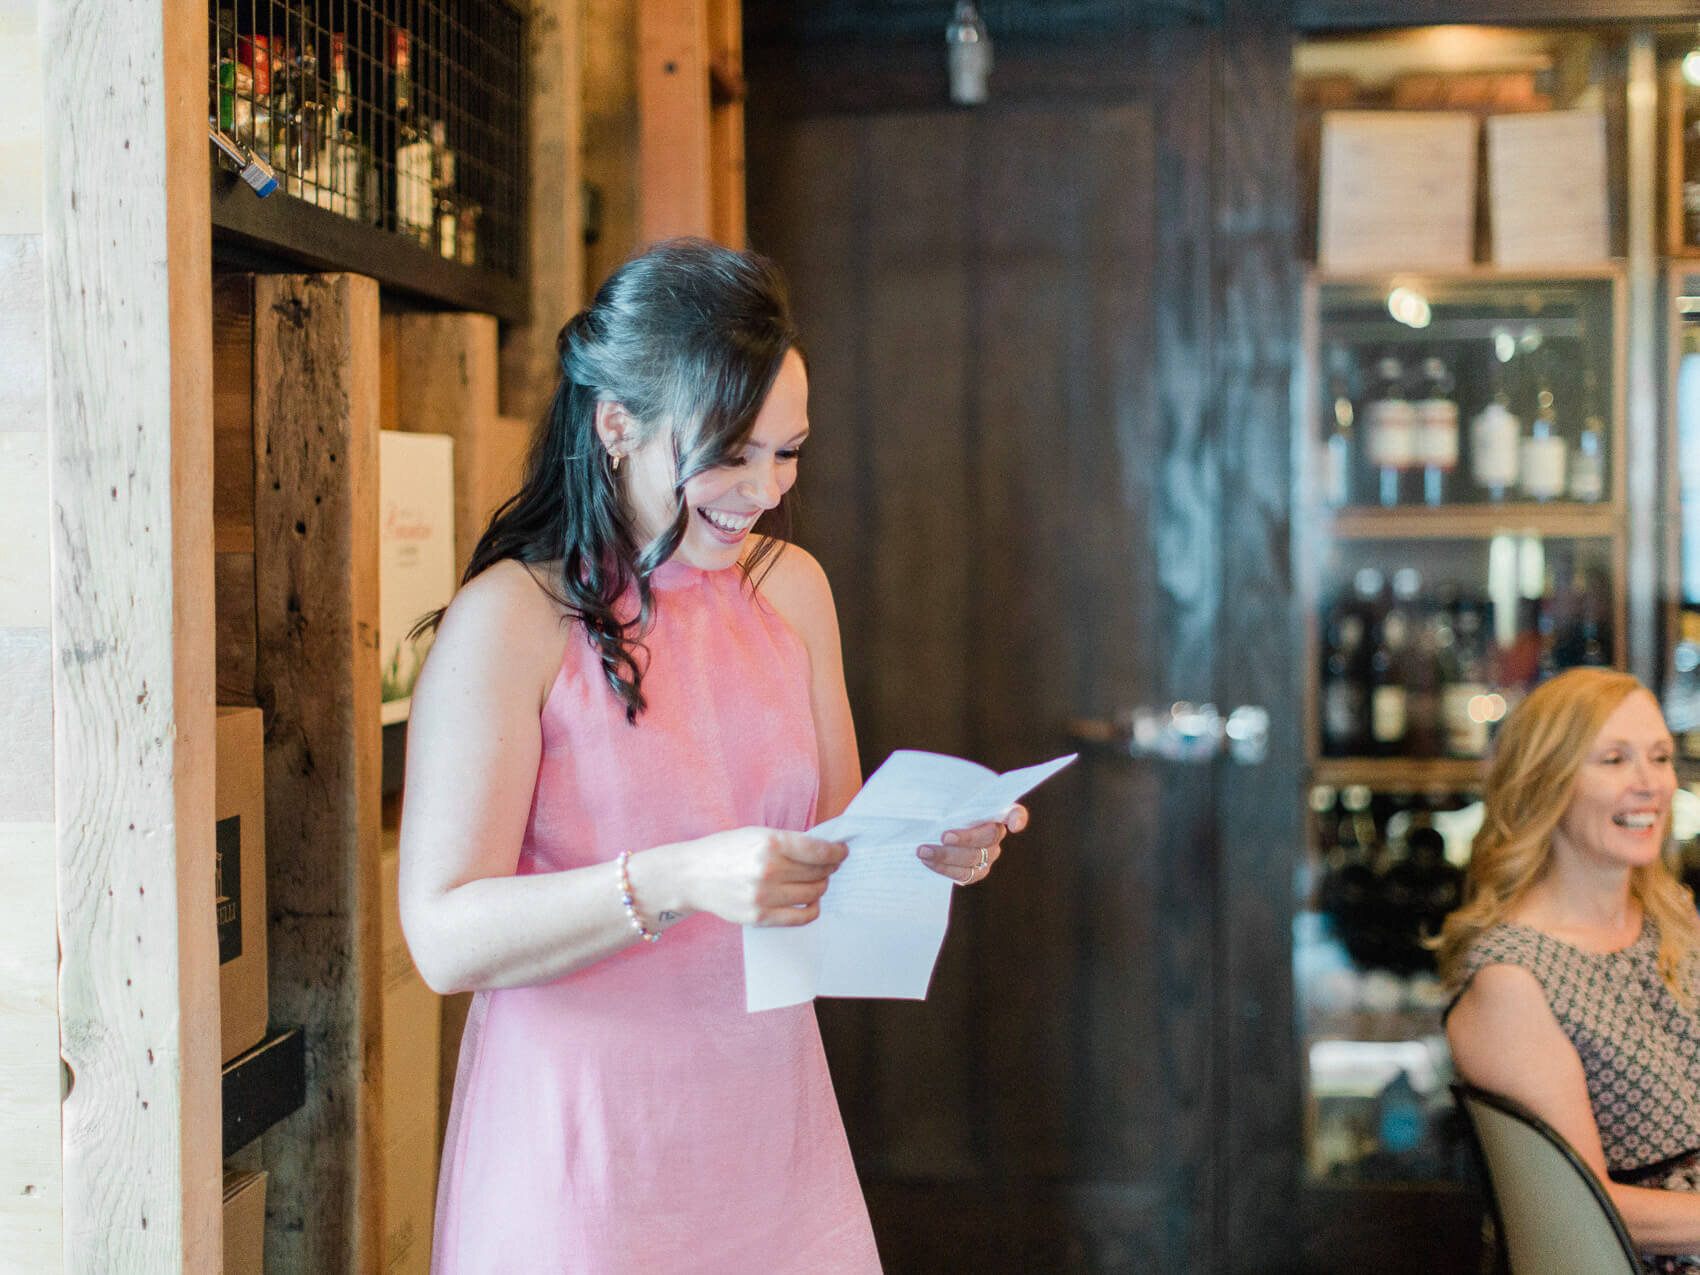 candid wedding reception moment at an intimate downtown toronto wedding at terroni restaurant